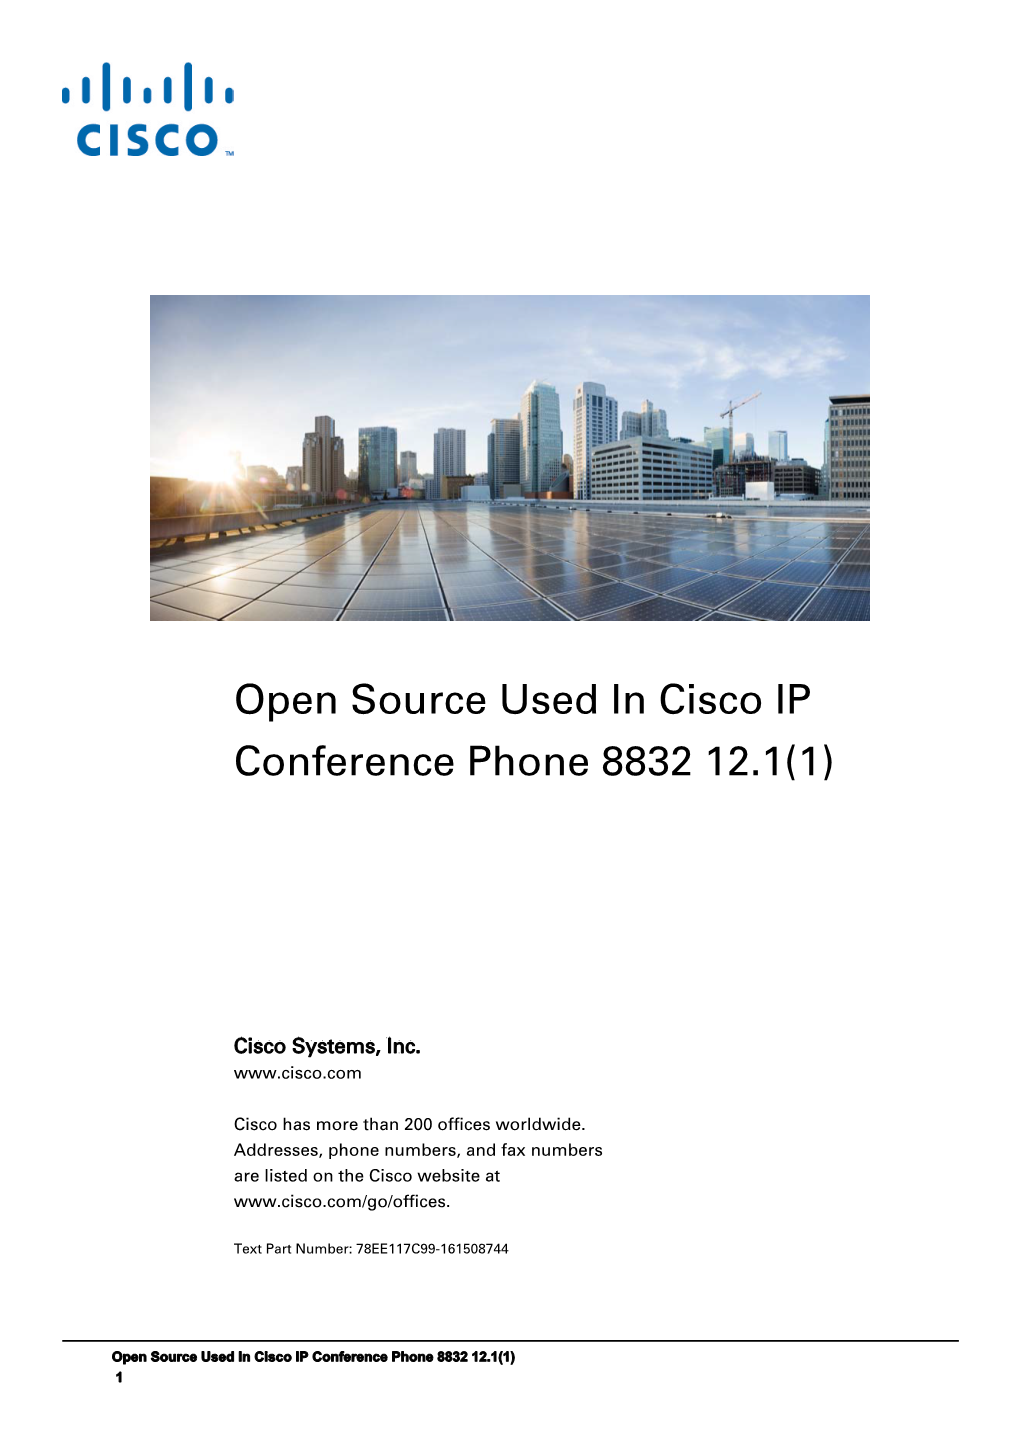 Open Source Used in Cisco IP Conference Phone 8832 Release